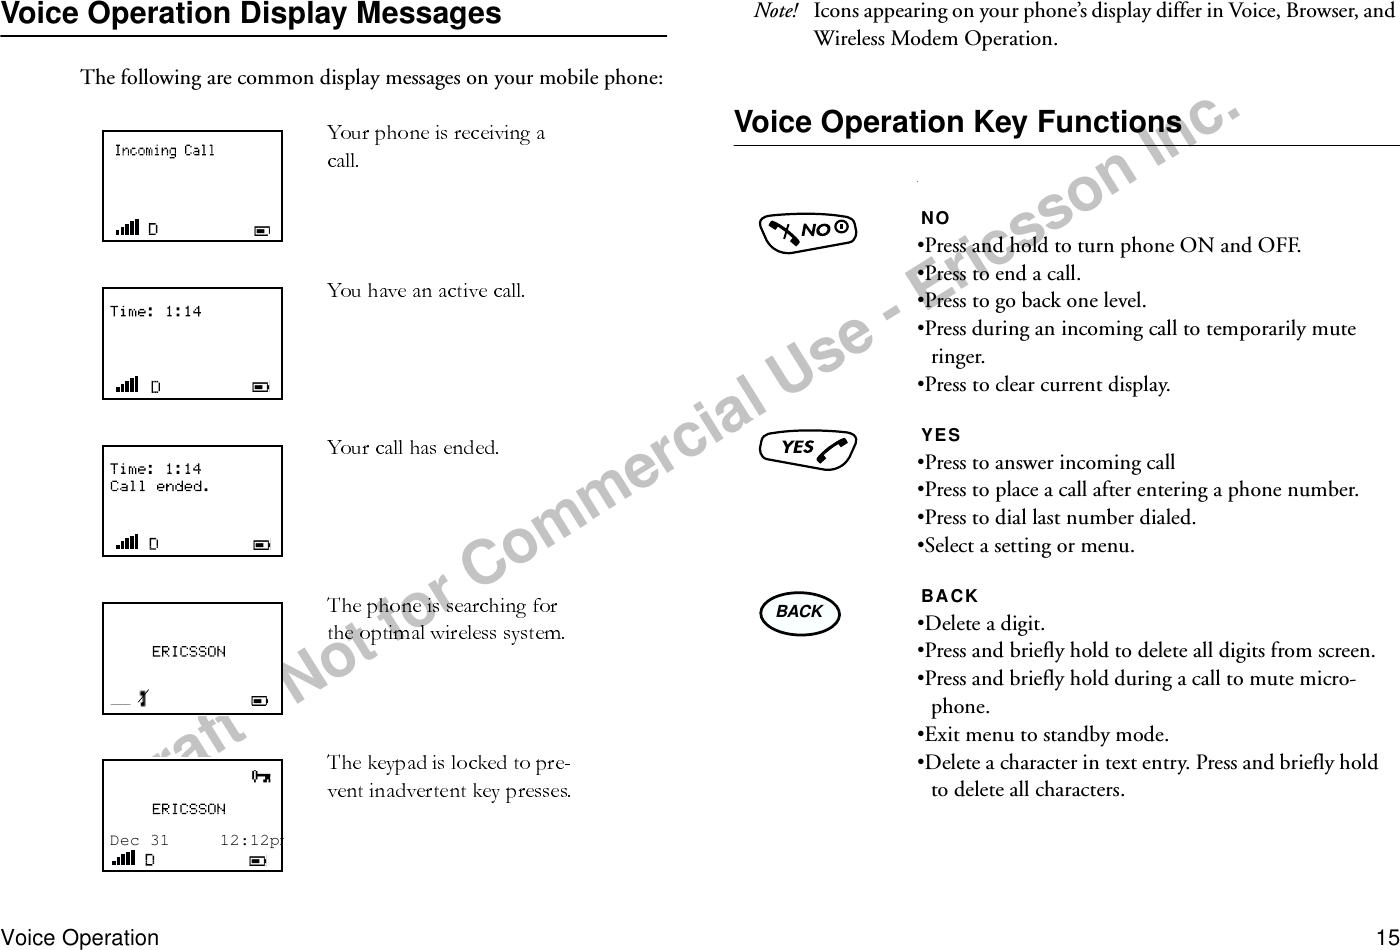 Draft - Not for Commercial Use - Ericsson Inc.Voice Operation 15Voice Operation Display MessagesThe following are common display messages on your mobile phone:Note! Icons appearing on your phone’s display differ in Voice, Browser, and Wireless Modem Operation.Voice Operation Key Functions.____Dec 31     12:12pmNO•Press and hold to turn phone ON and OFF.•Press to end a call.•Press to go back one level.•Press during an incoming call to temporarily mute ringer.•Press to clear current display.YES •Press to answer incoming call•Press to place a call after entering a phone number.•Press to dial last number dialed.•Select a setting or menu.BACK•Delete a digit.•Press and briefly hold to delete all digits from screen.•Press and briefly hold during a call to mute micro-phone.•Exit menu to standby mode.•Delete a character in text entry. Press and briefly hold to delete all characters.BACK